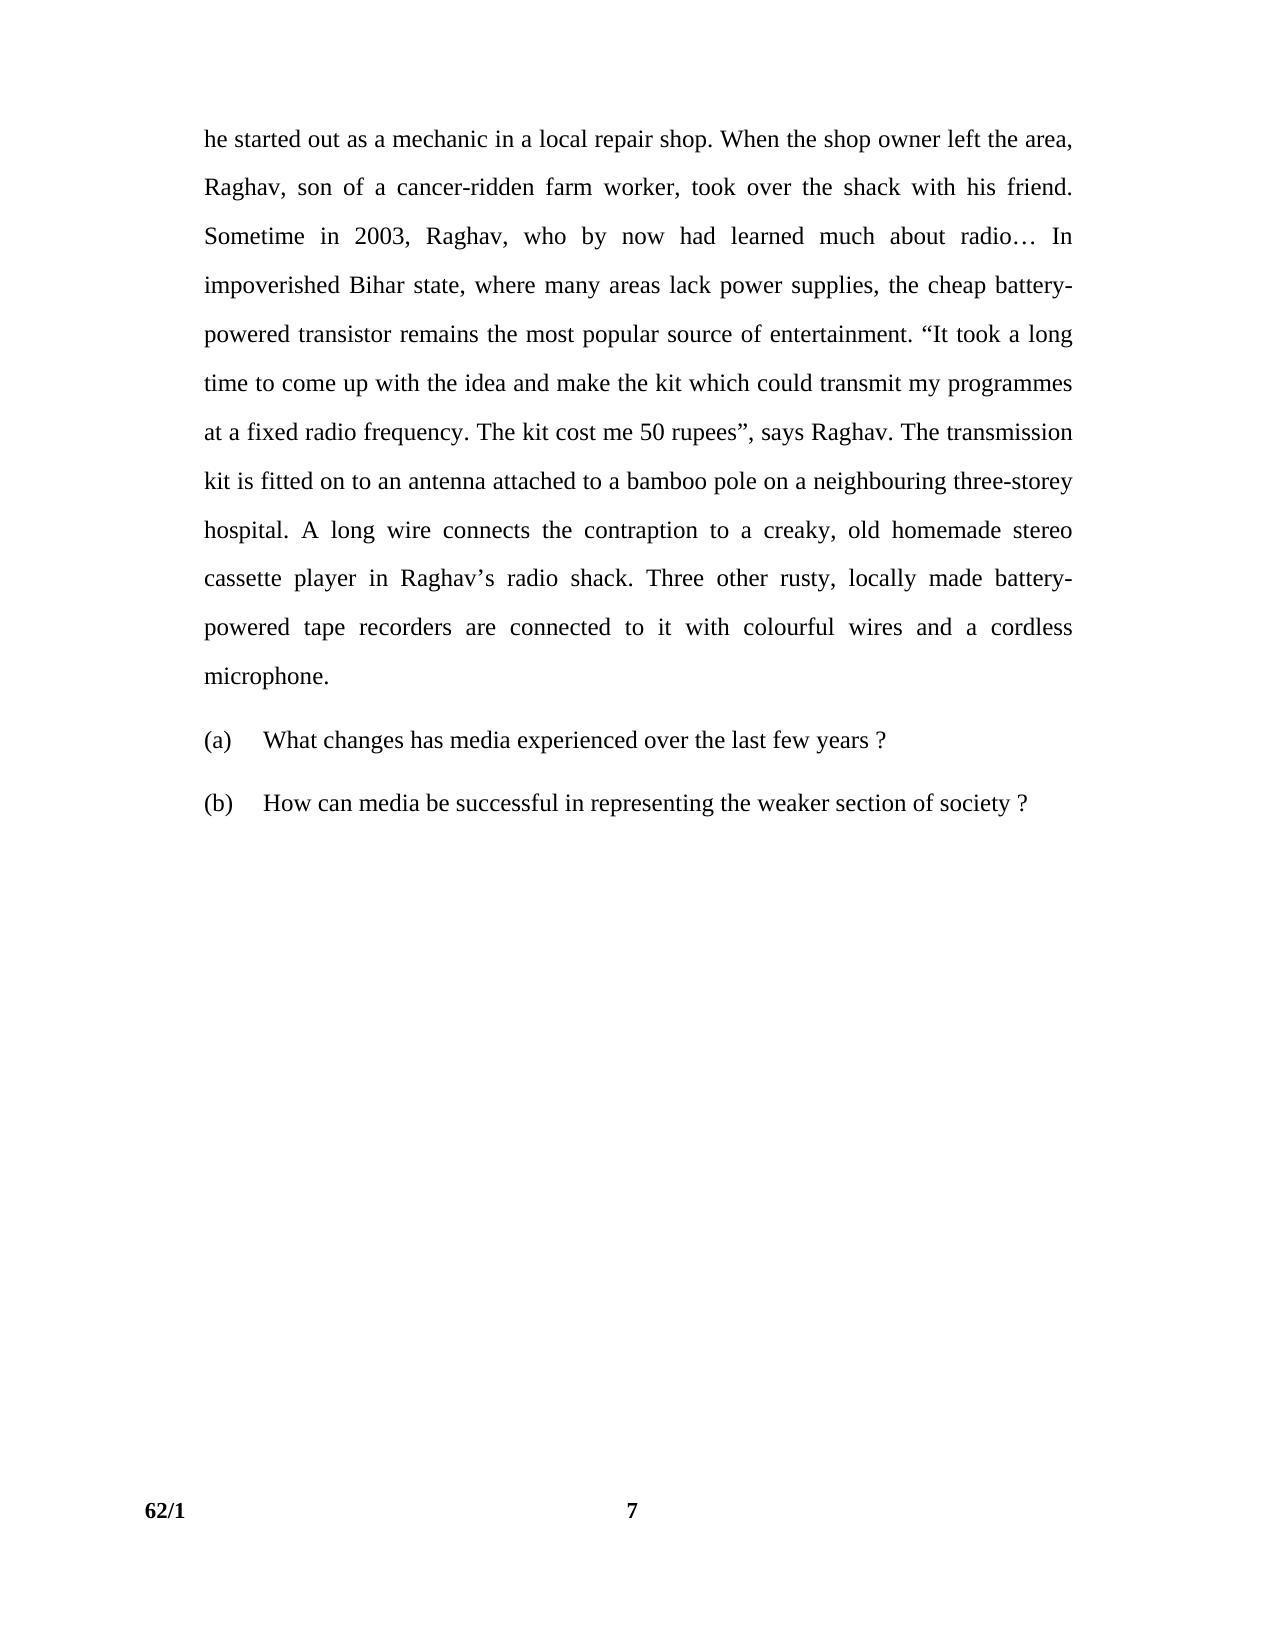 CBSE Class 12 62-1 SOCIOLOGY 2016 Question Paper - Page 7